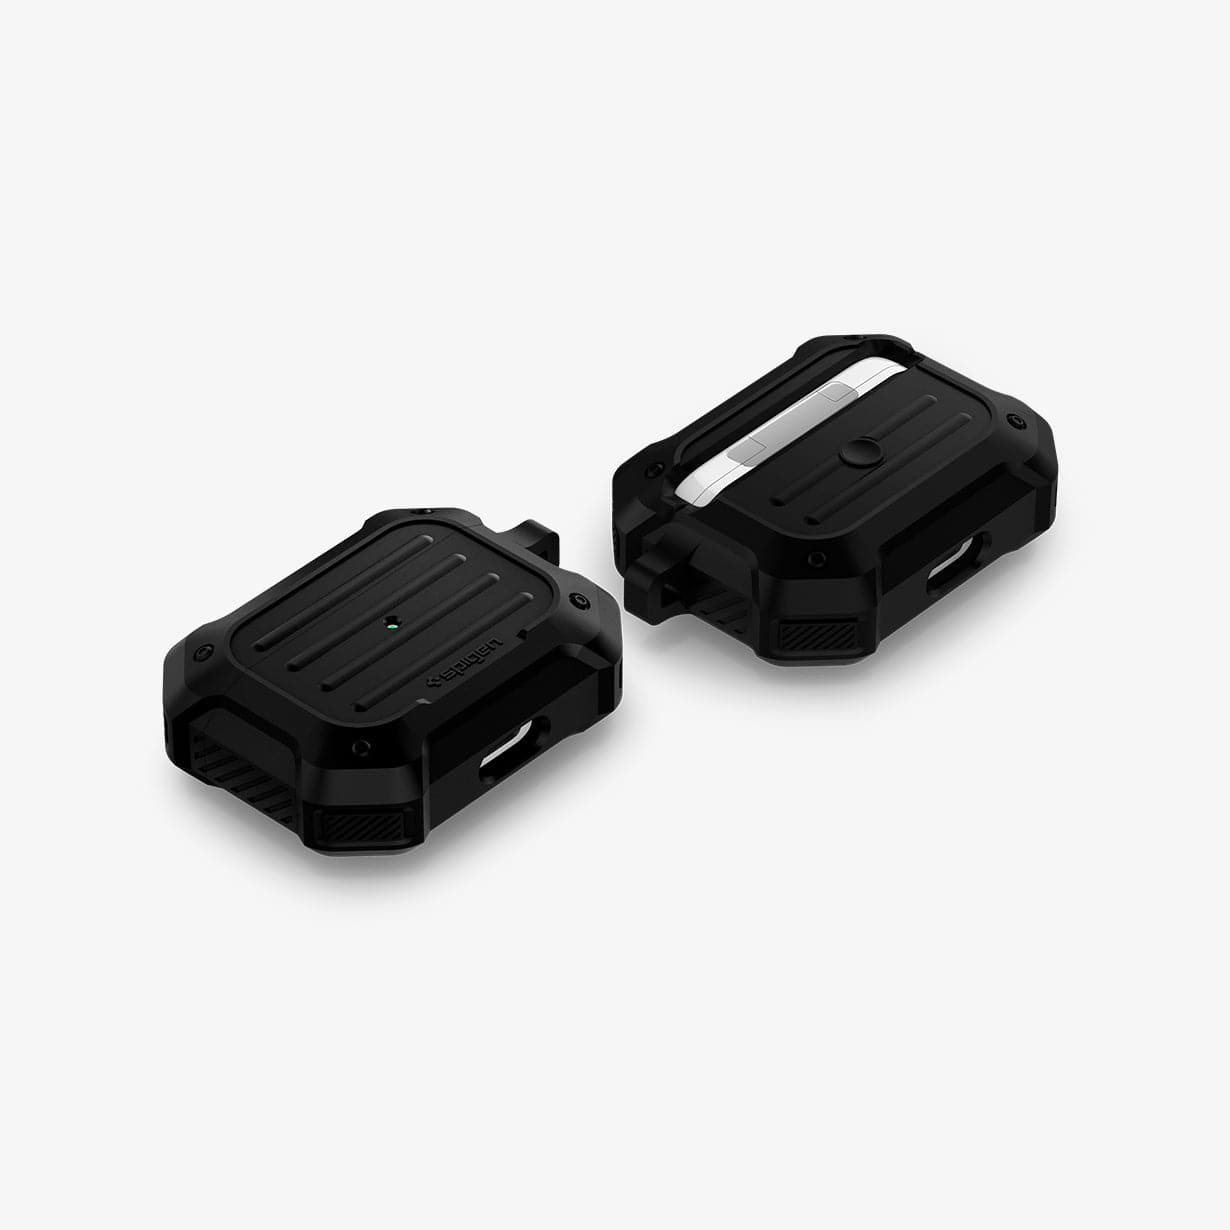 ASD00537 - Apple AirPods Pro Case Tough Armor in black showing the front, back and side